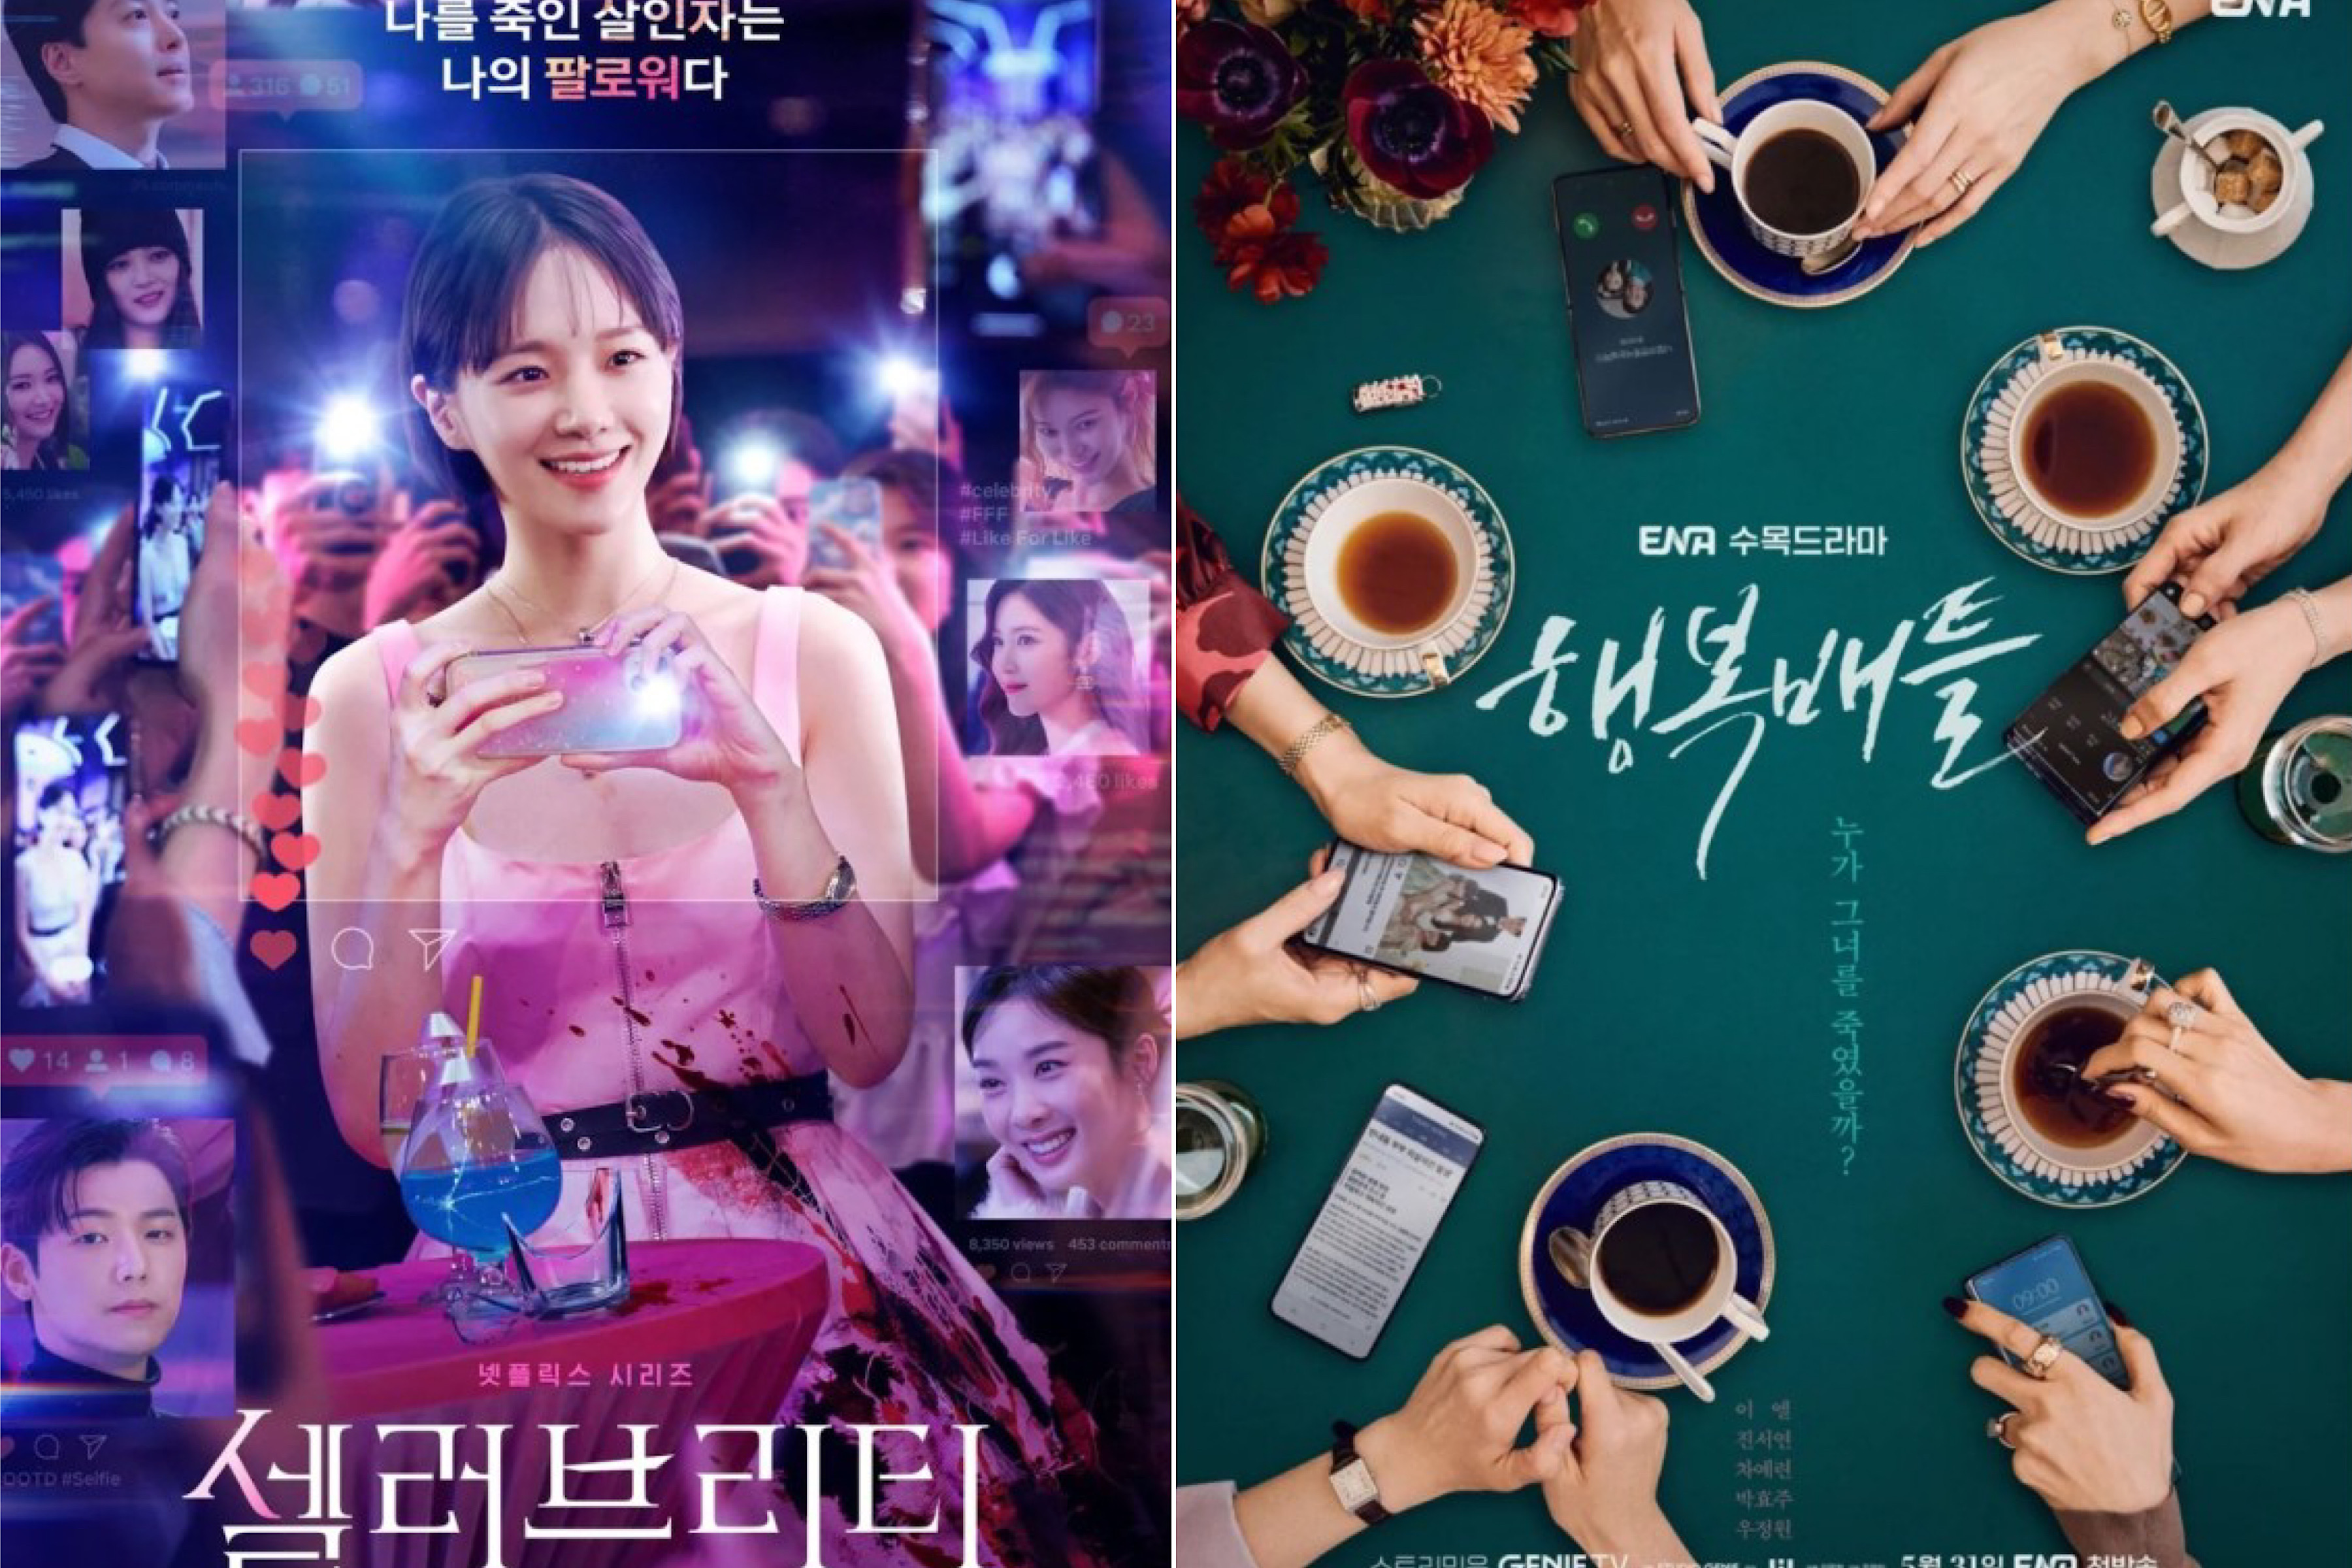 Posters of "Celebrity" and "Happiness battle"